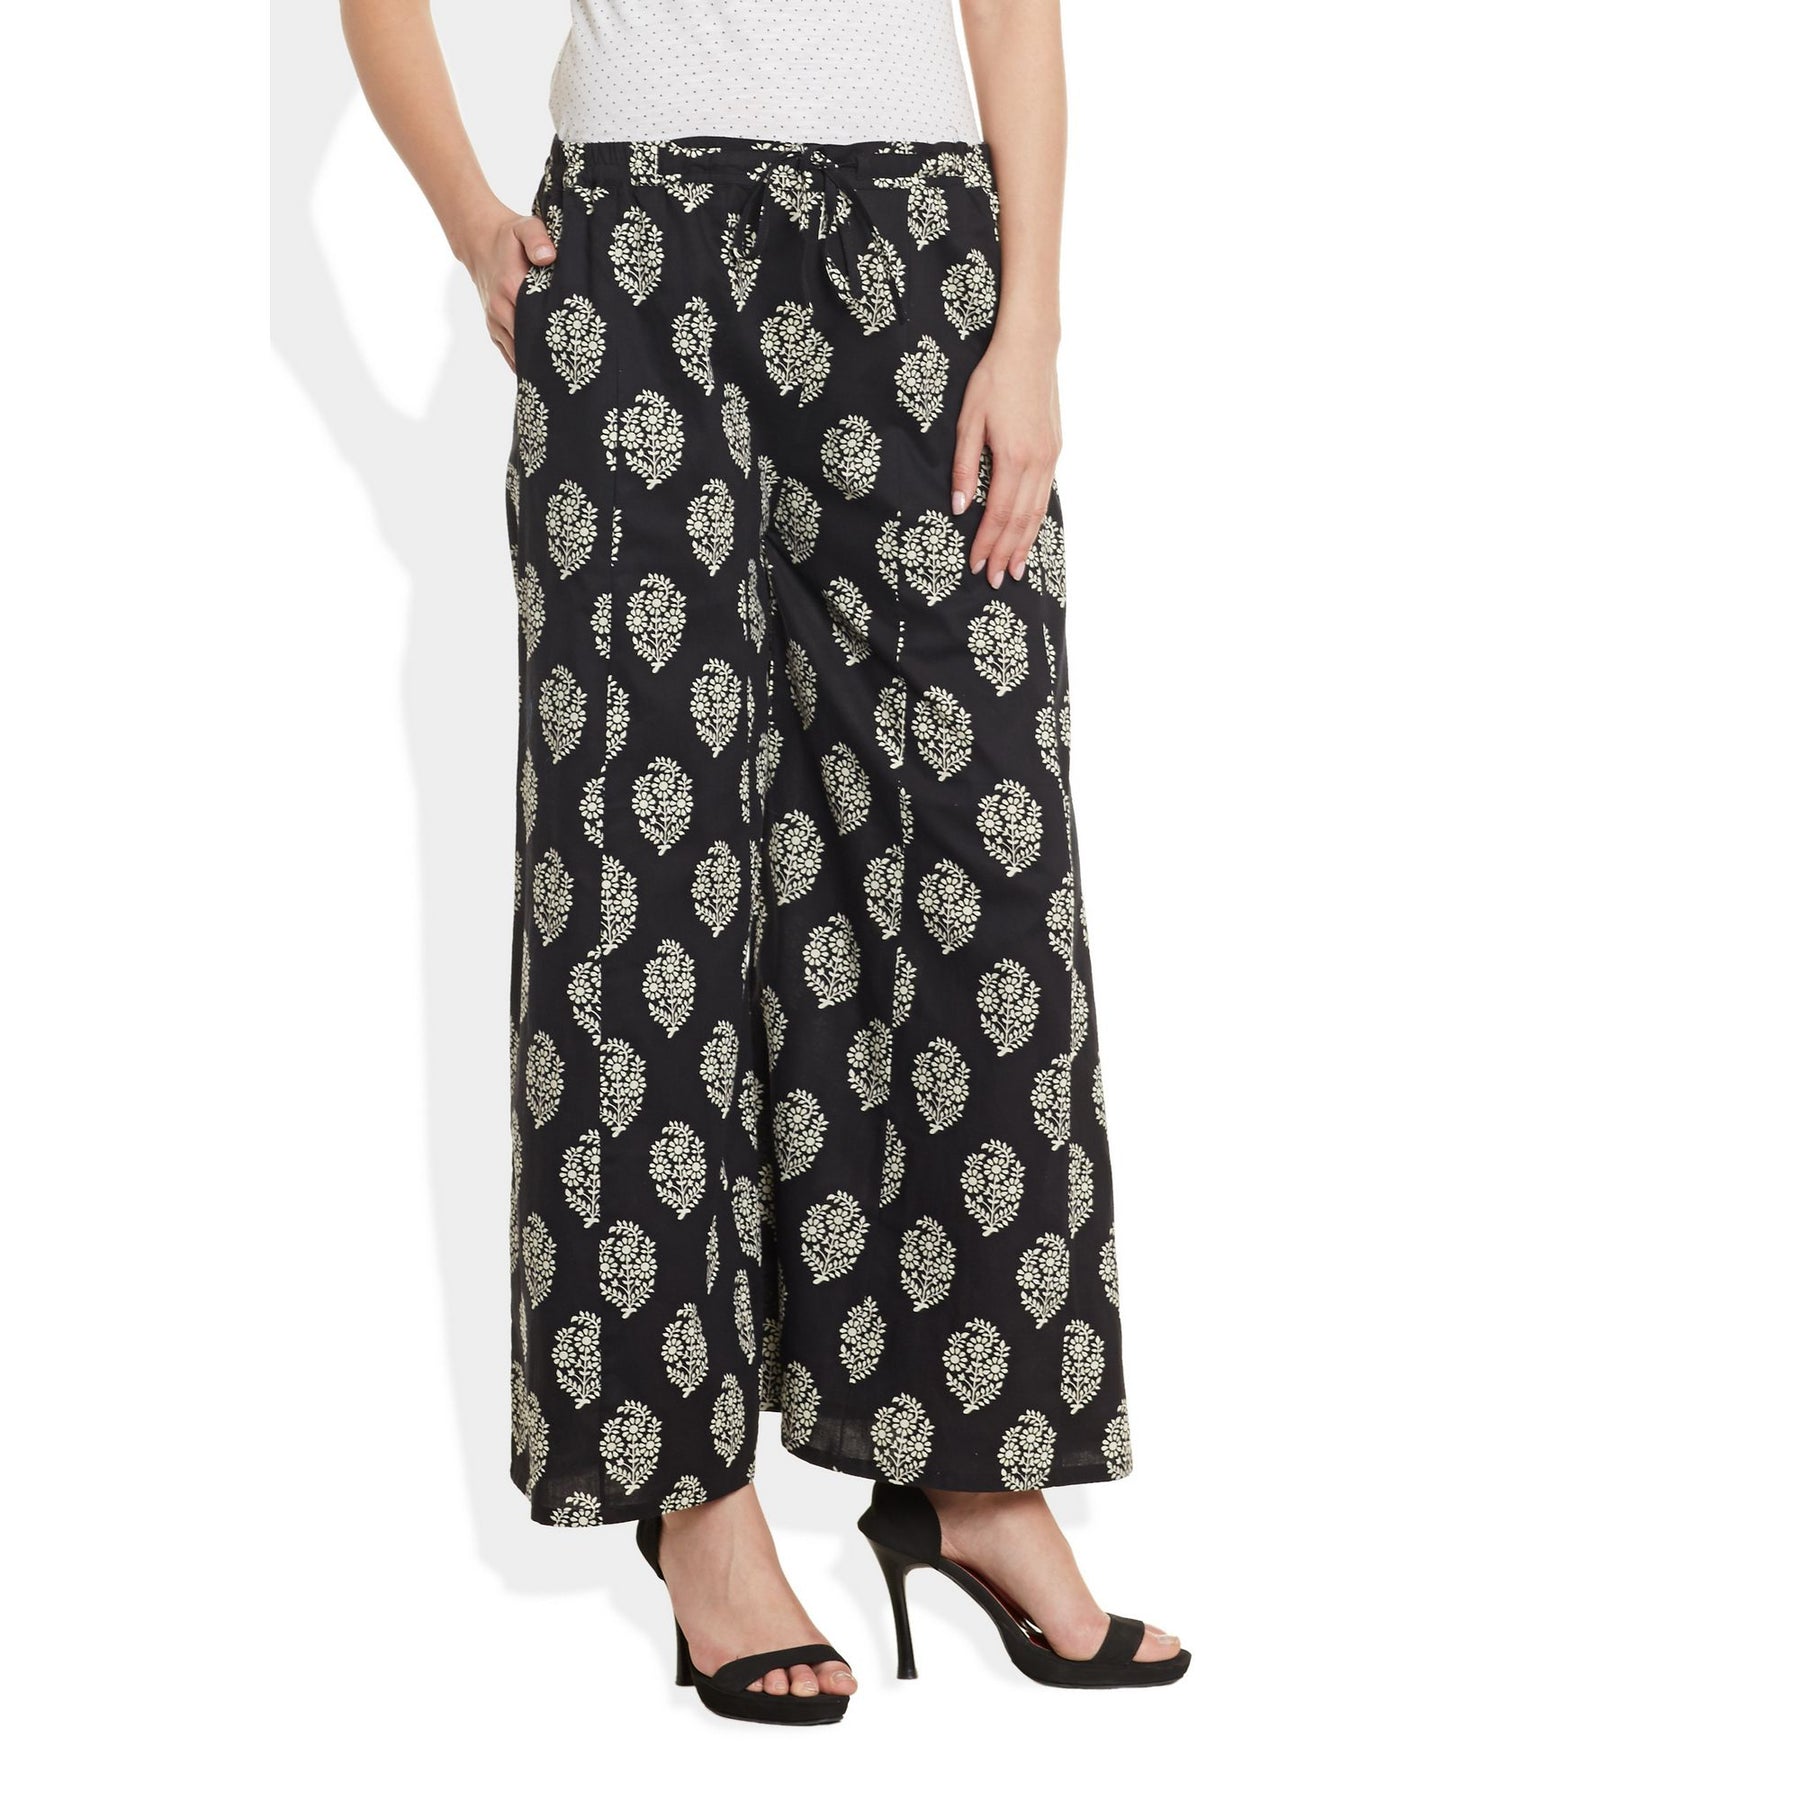 Cotton Printed Palazzo Pants For Women Indian,X-Large,W-CPLZXL